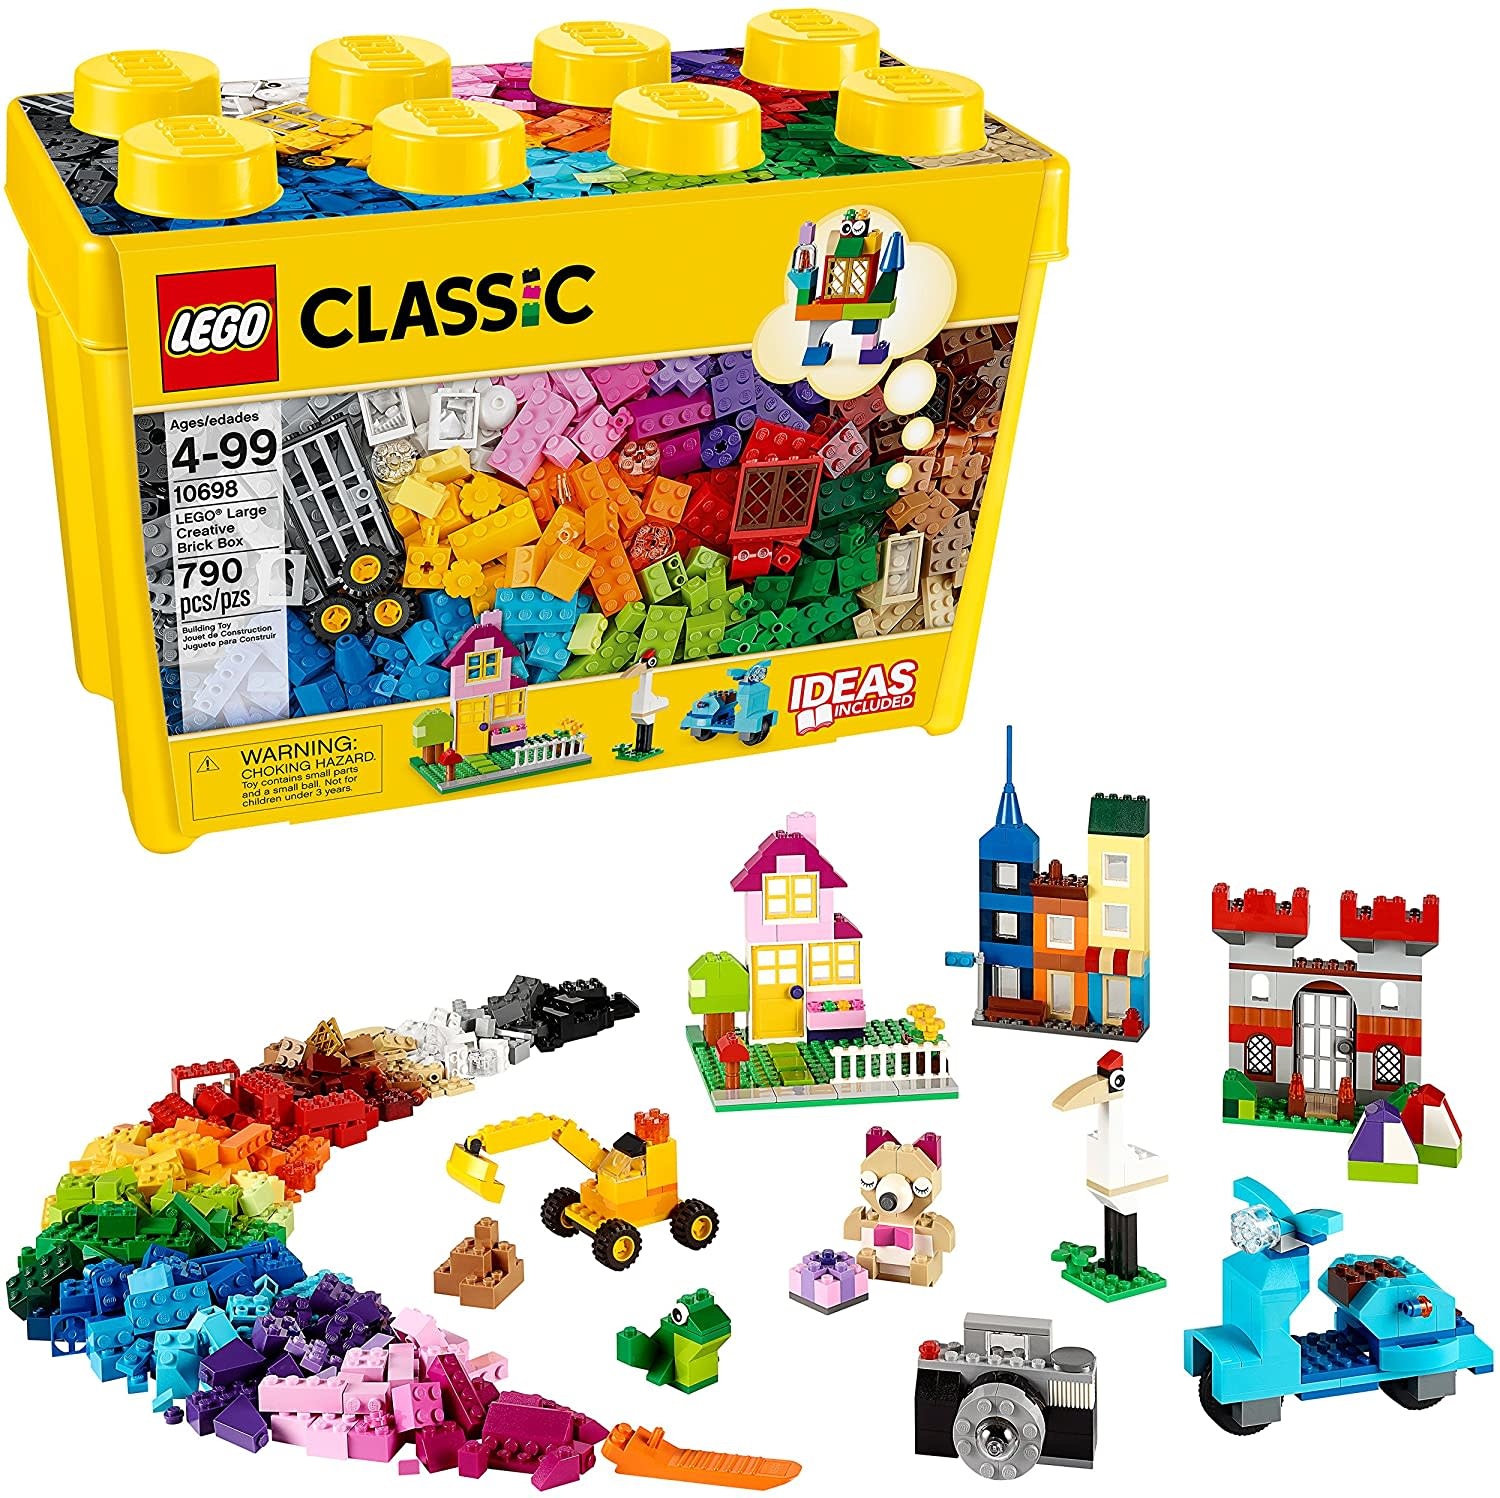 LEGO Classic LEGO Classic Large Creative Brick Box - Build Your Own Creative Toys - Kids Building Kit (790 Pieces)